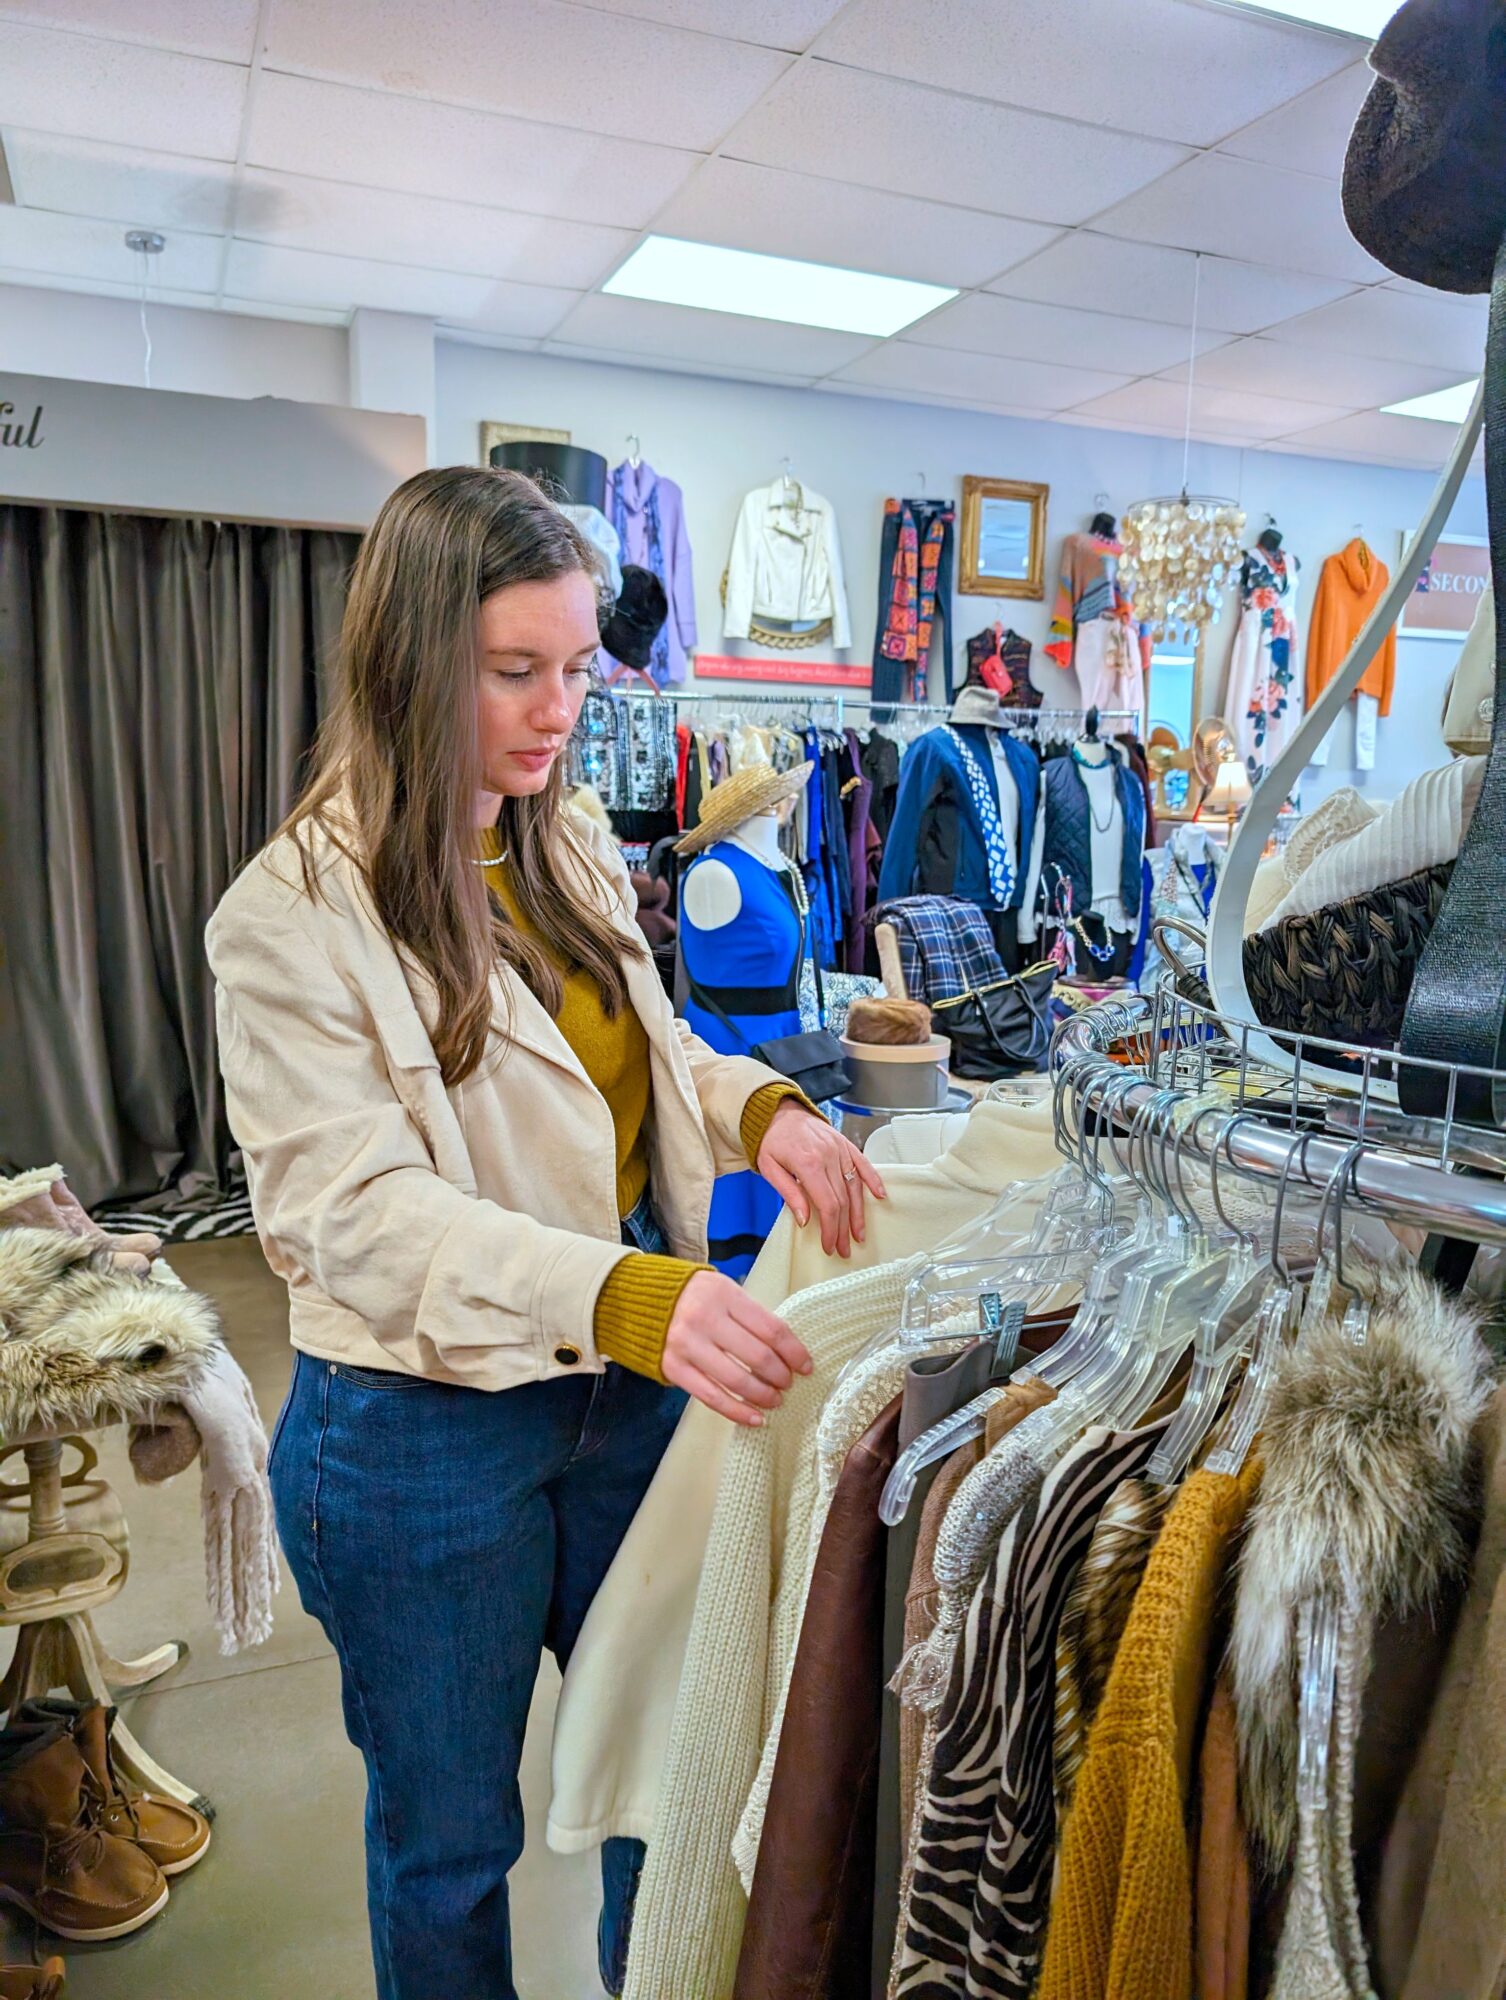 Alyssa shops at a thrift store in Waxhaw